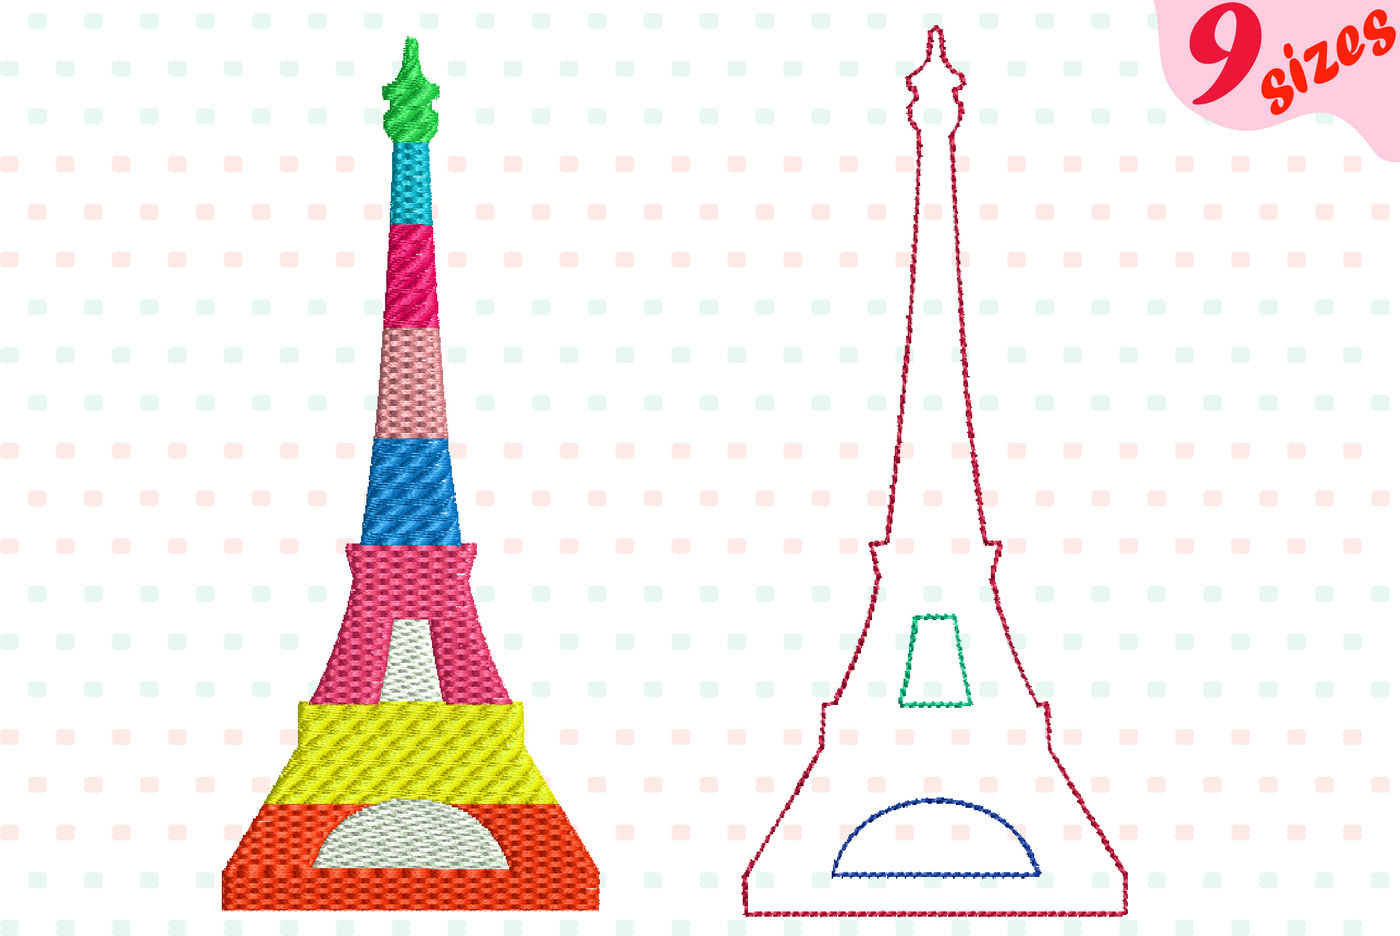 The Eiffel Tower (Free Template For a 3D Pen)